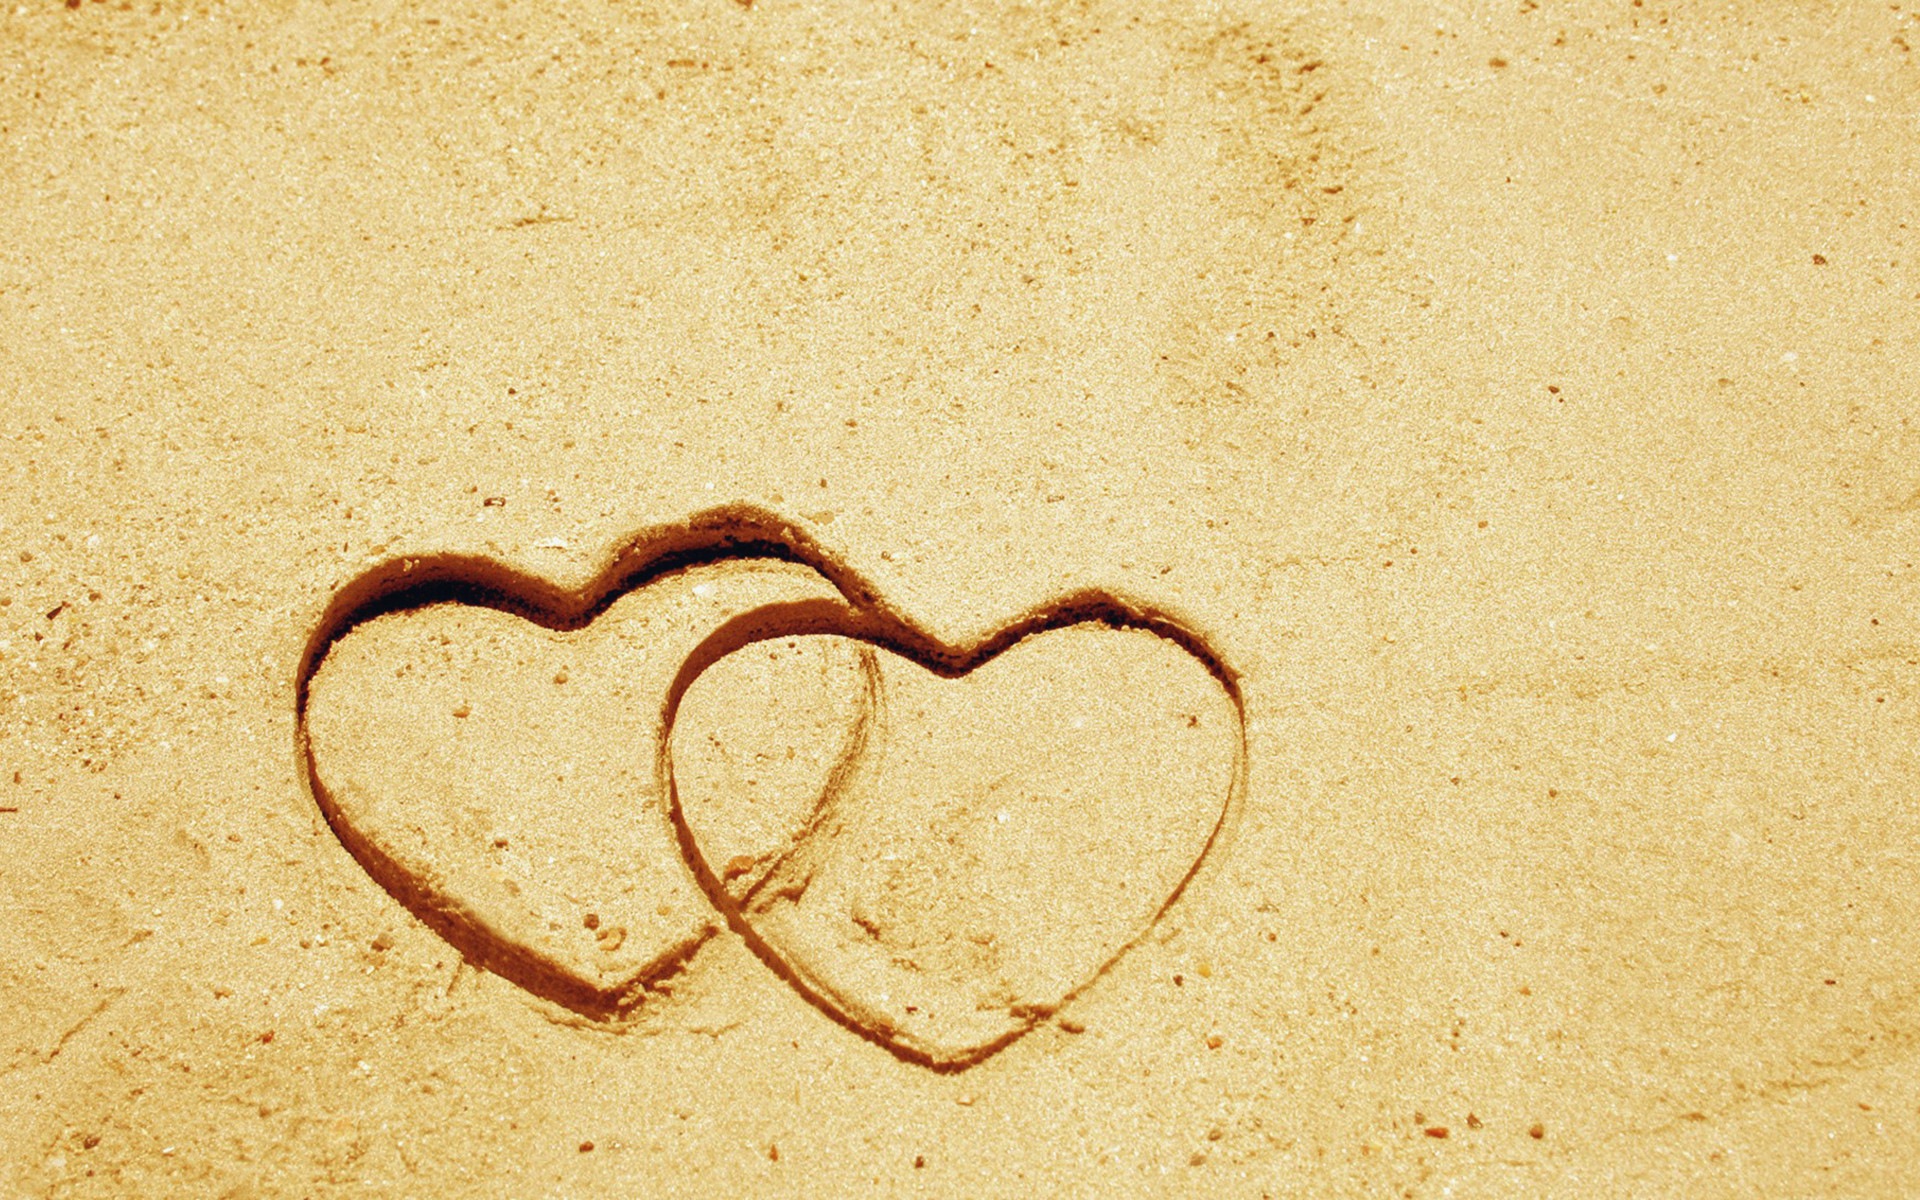 The theme of love, creative heart-shaped HD wallpapers #15 - 1920x1200